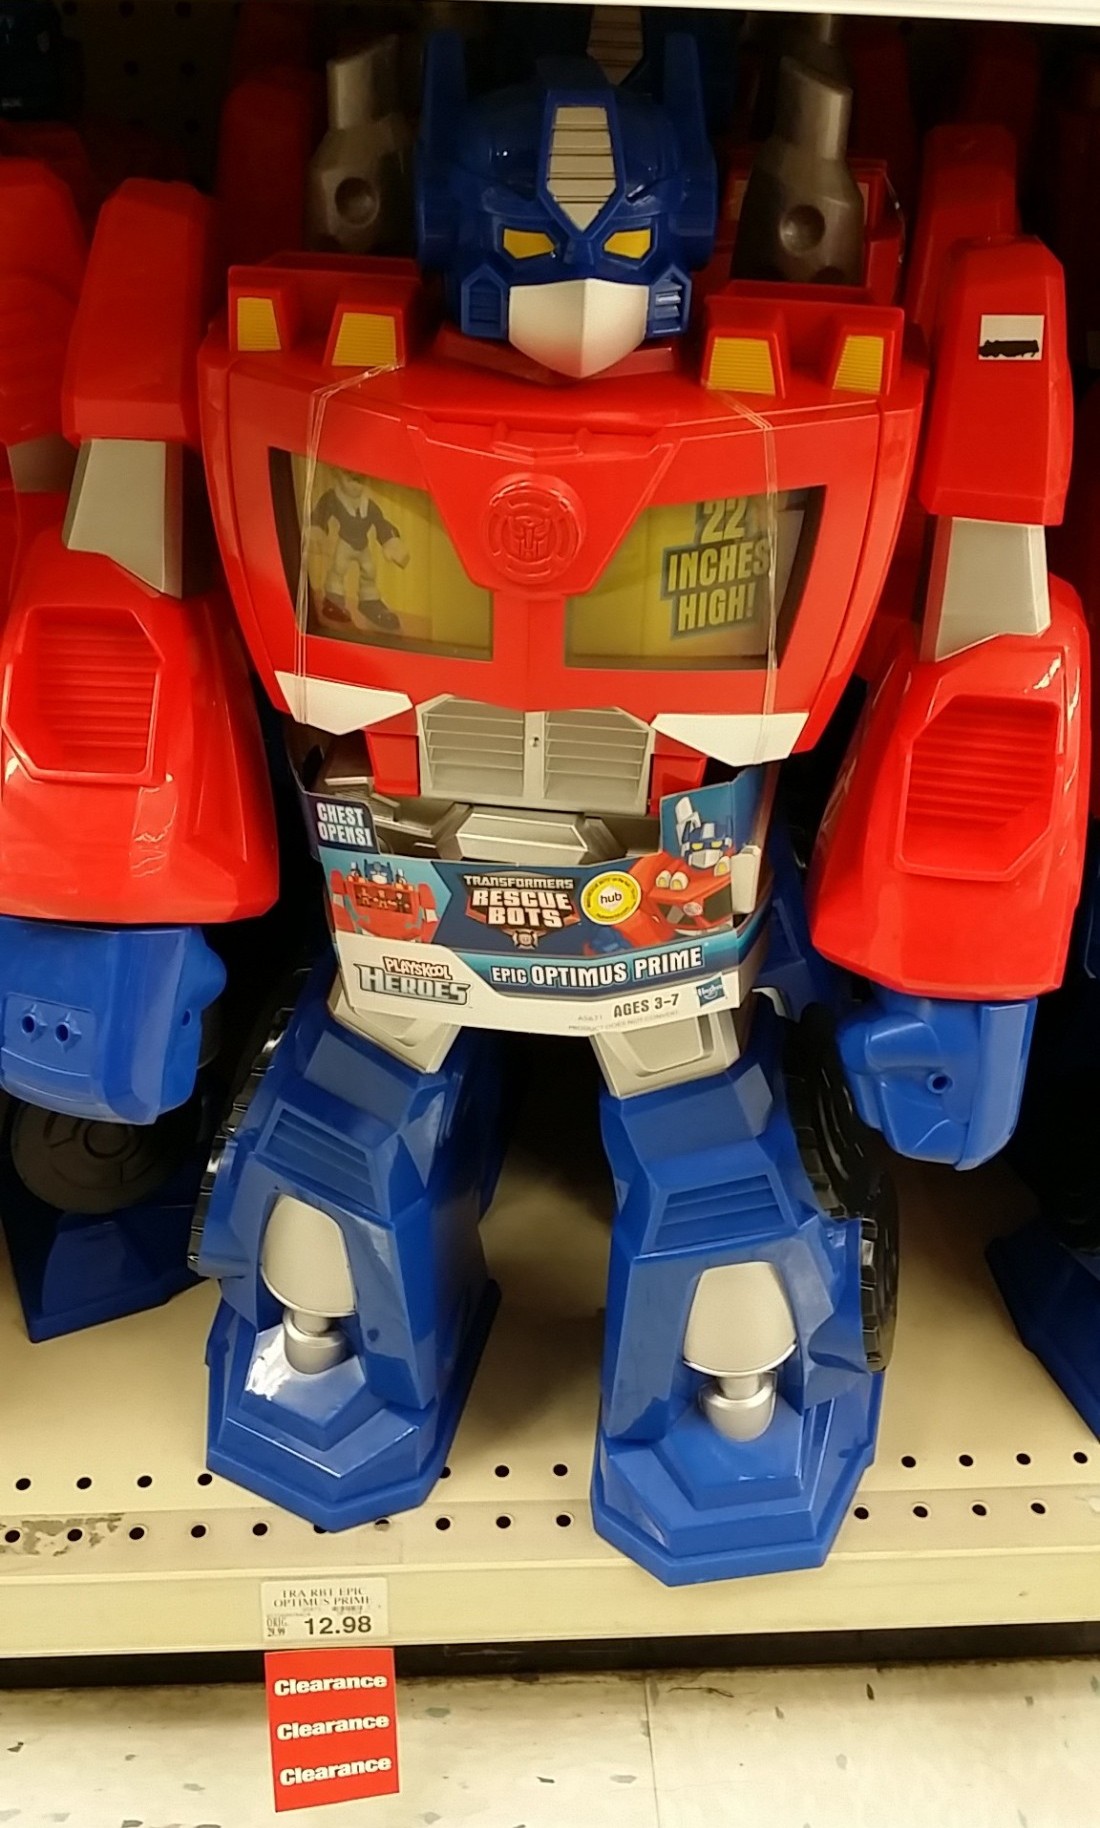 Toys R Us clearance Epic Optimus Prime Transformers Rescue Bots Transformers Rescue Bots 2014 Playskool Heroes